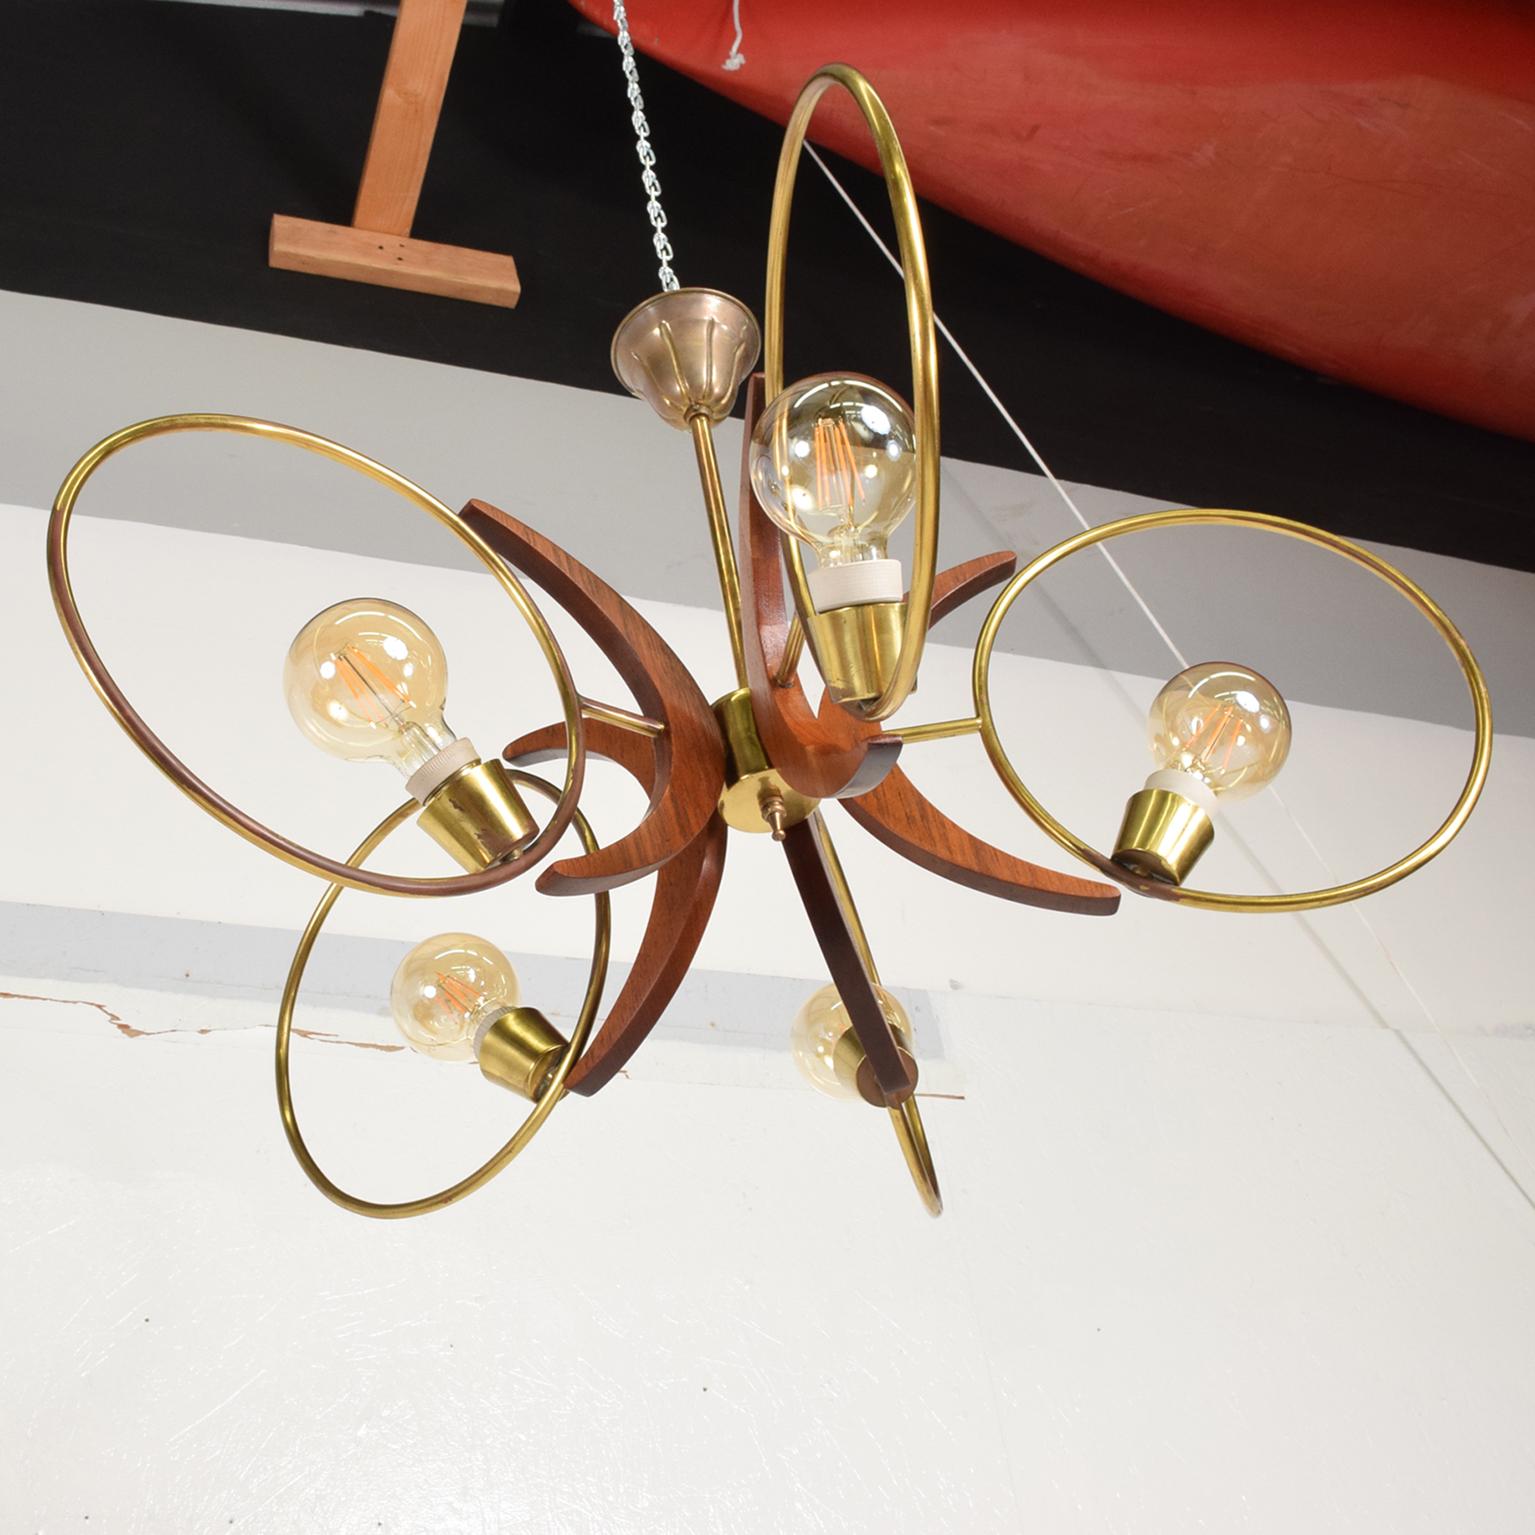 1960s Five Ring Sculptural Chandelier Brass and Mahogany Mexico City For Sale 1